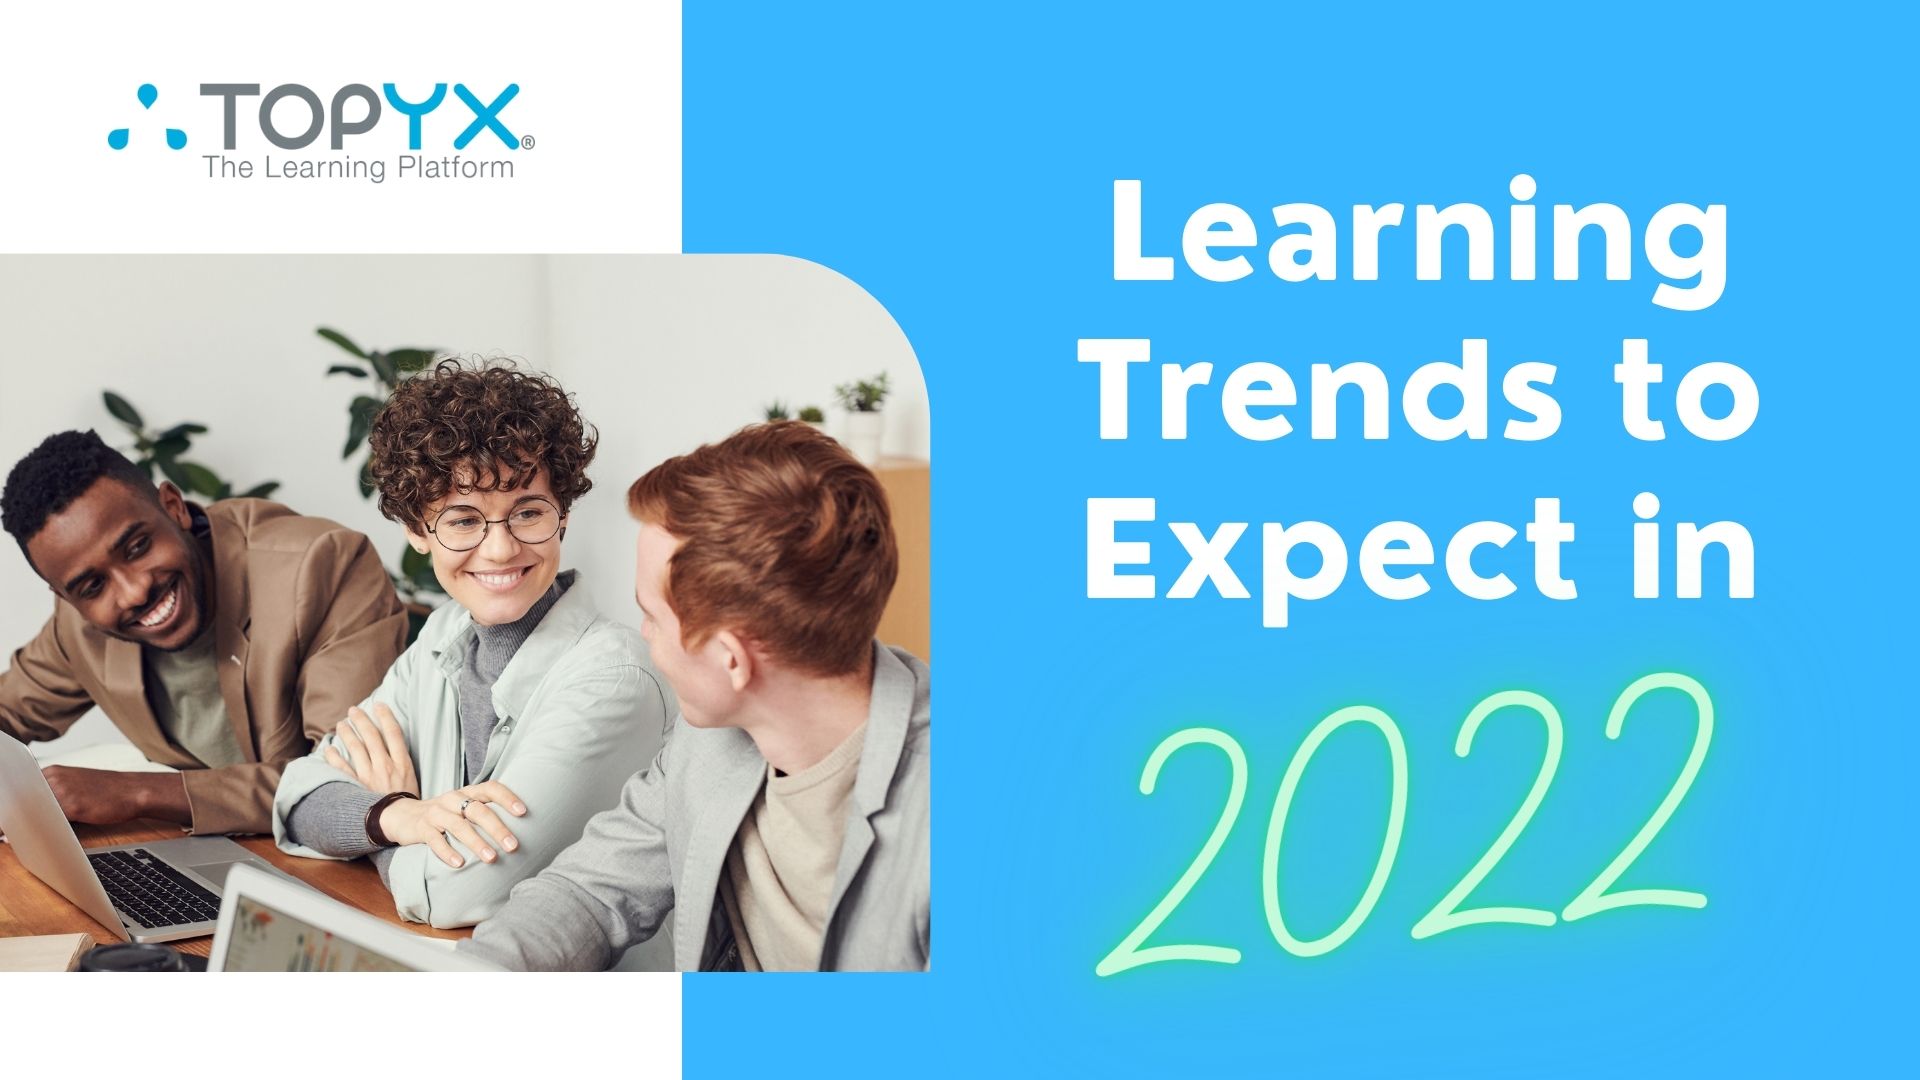 3 Corporate Learning Trends to Expect in 2022